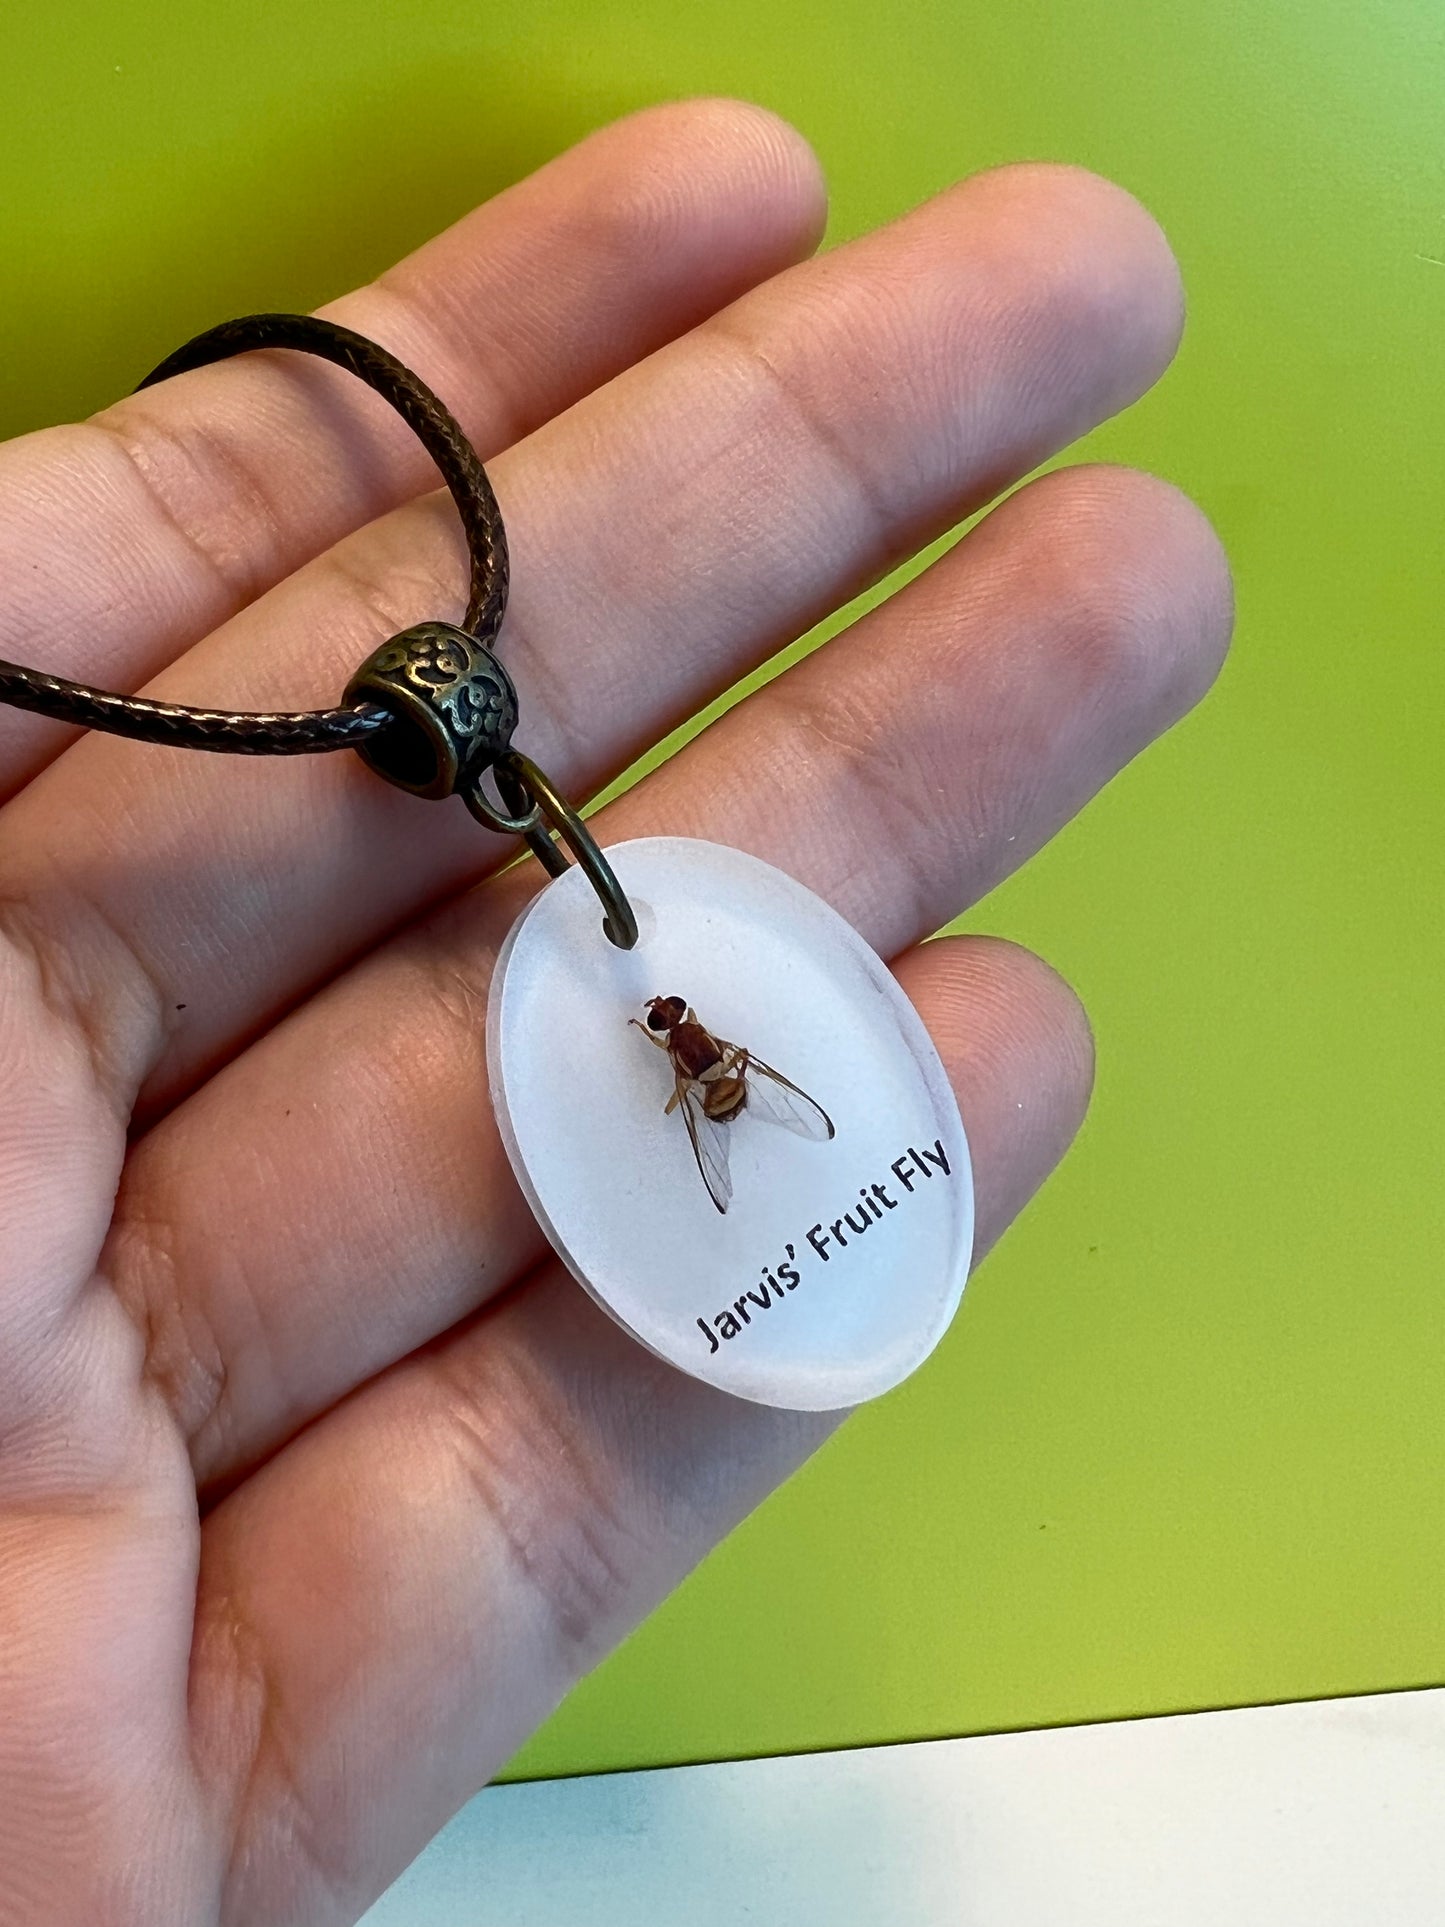 Jarvis' Fruit Fly necklace